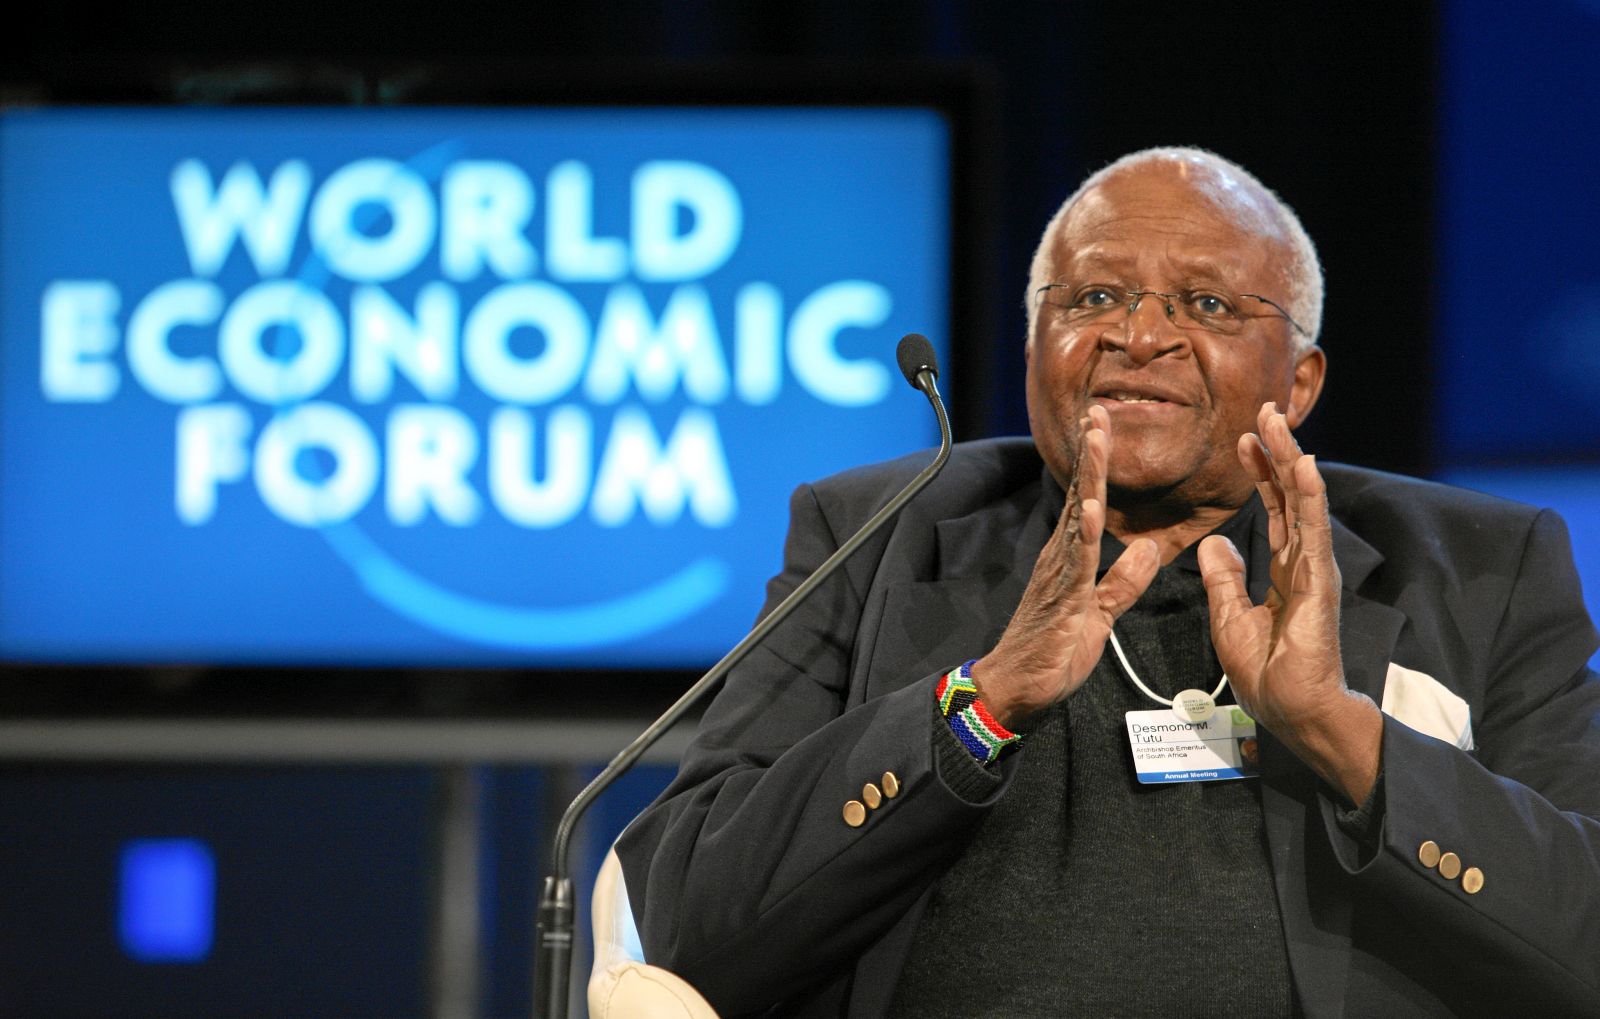 DAVOS-KLOSTERS/SWITZERLAND, 1FEB09 - Desmond M. Tutu, Archbishop Emeritus of South Africa gestures during the session 'Believing in the Dignity of All' at the Annual Meeting 2009 of the World Economic Forum in Davos, Switzerland, February1, 2009.

Copyright by World Economic Forum
swiss-image.ch/Photo by Remy Steinegger